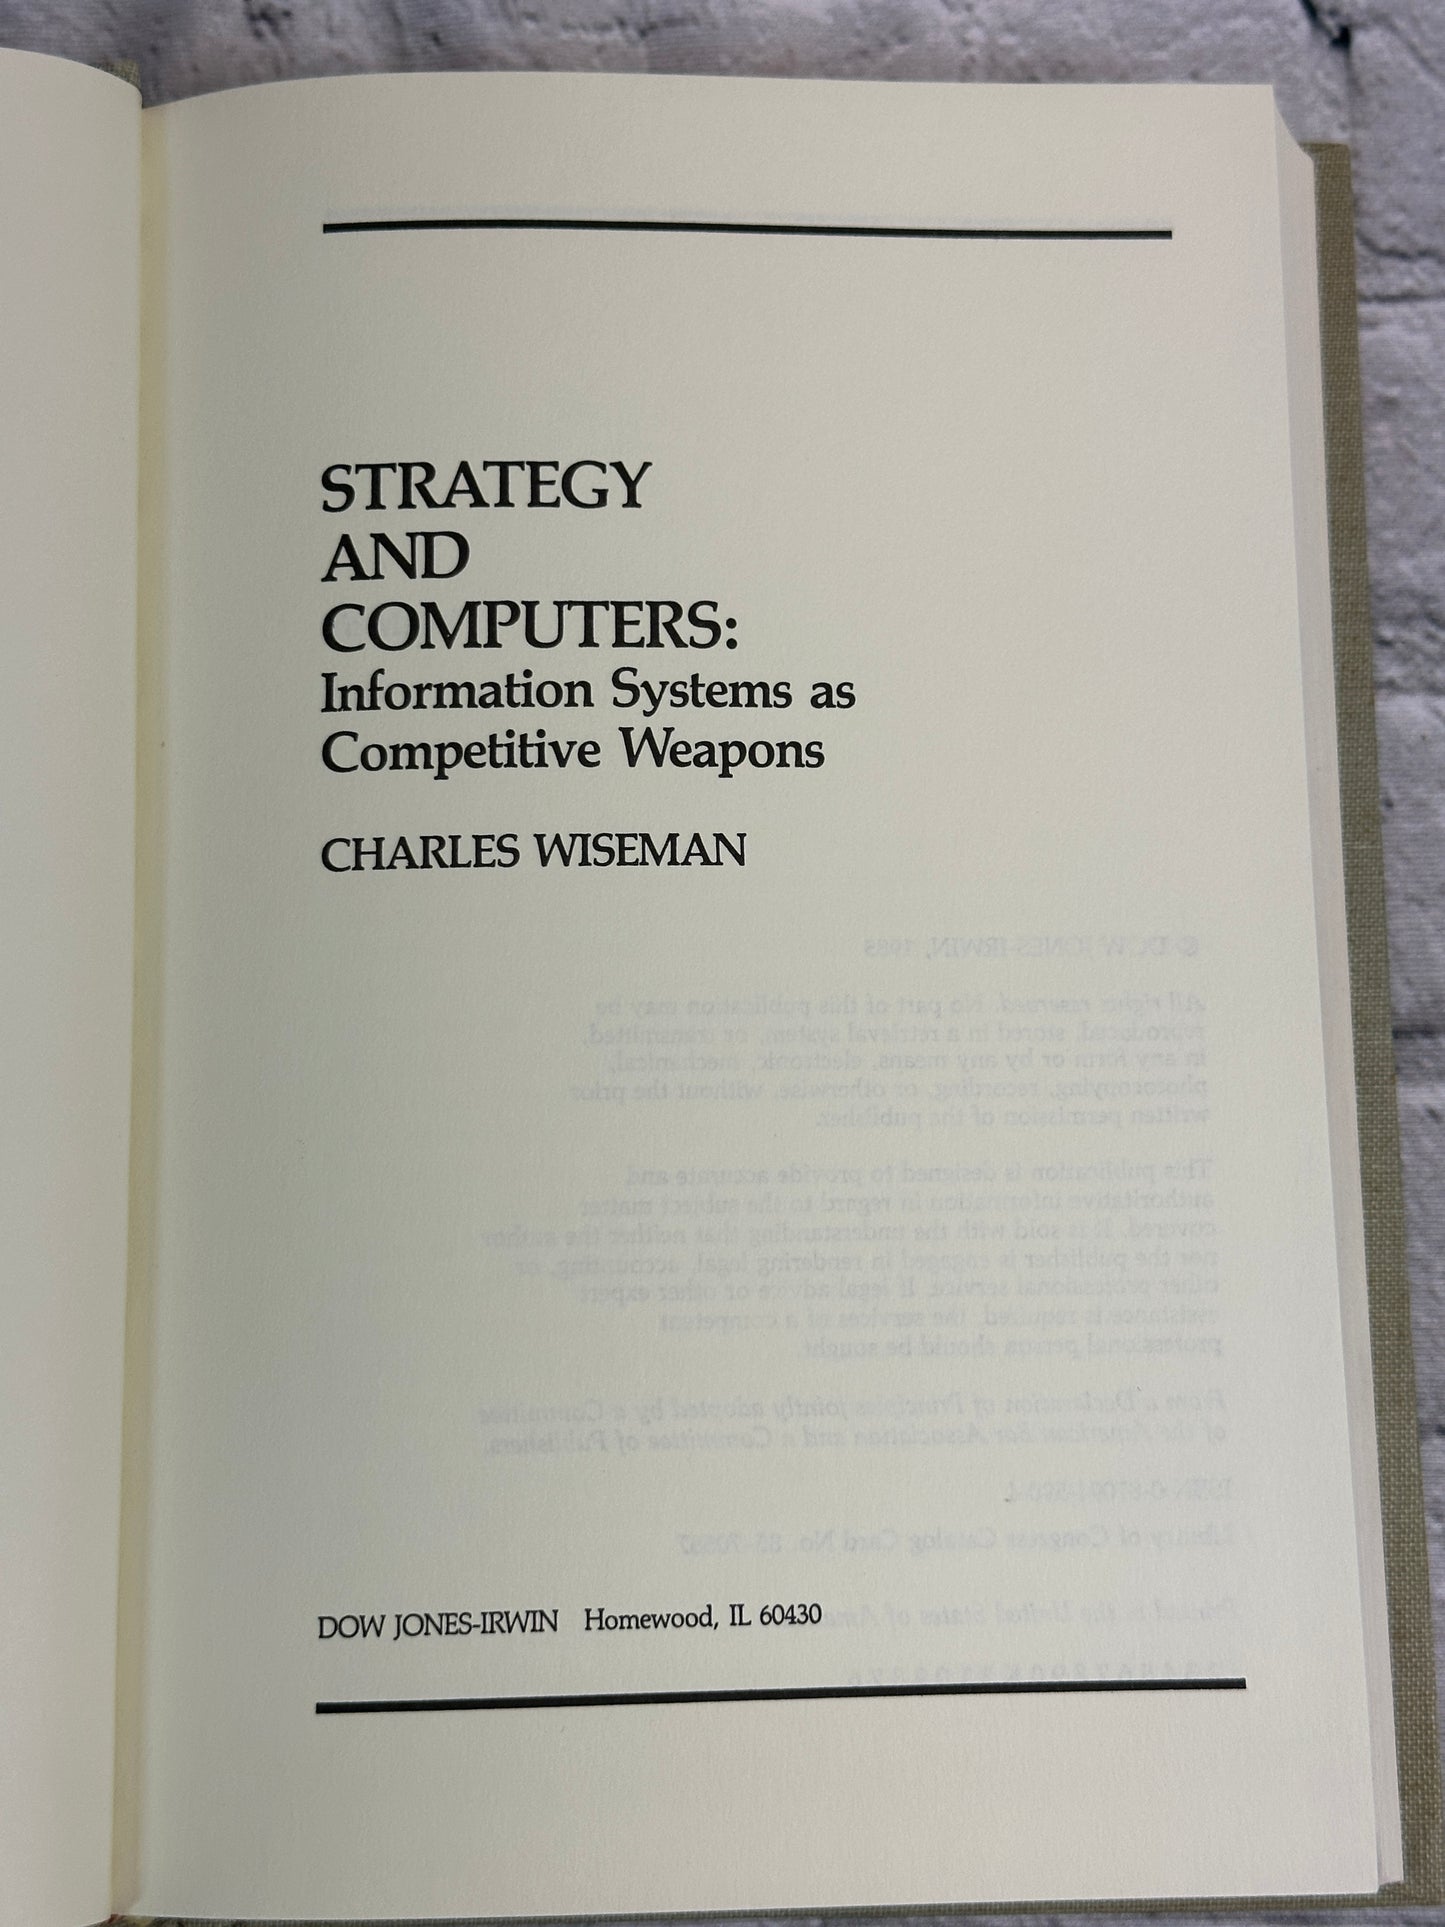 Strategy and Computers: Information Systems...by Charles Wiseman [1985]